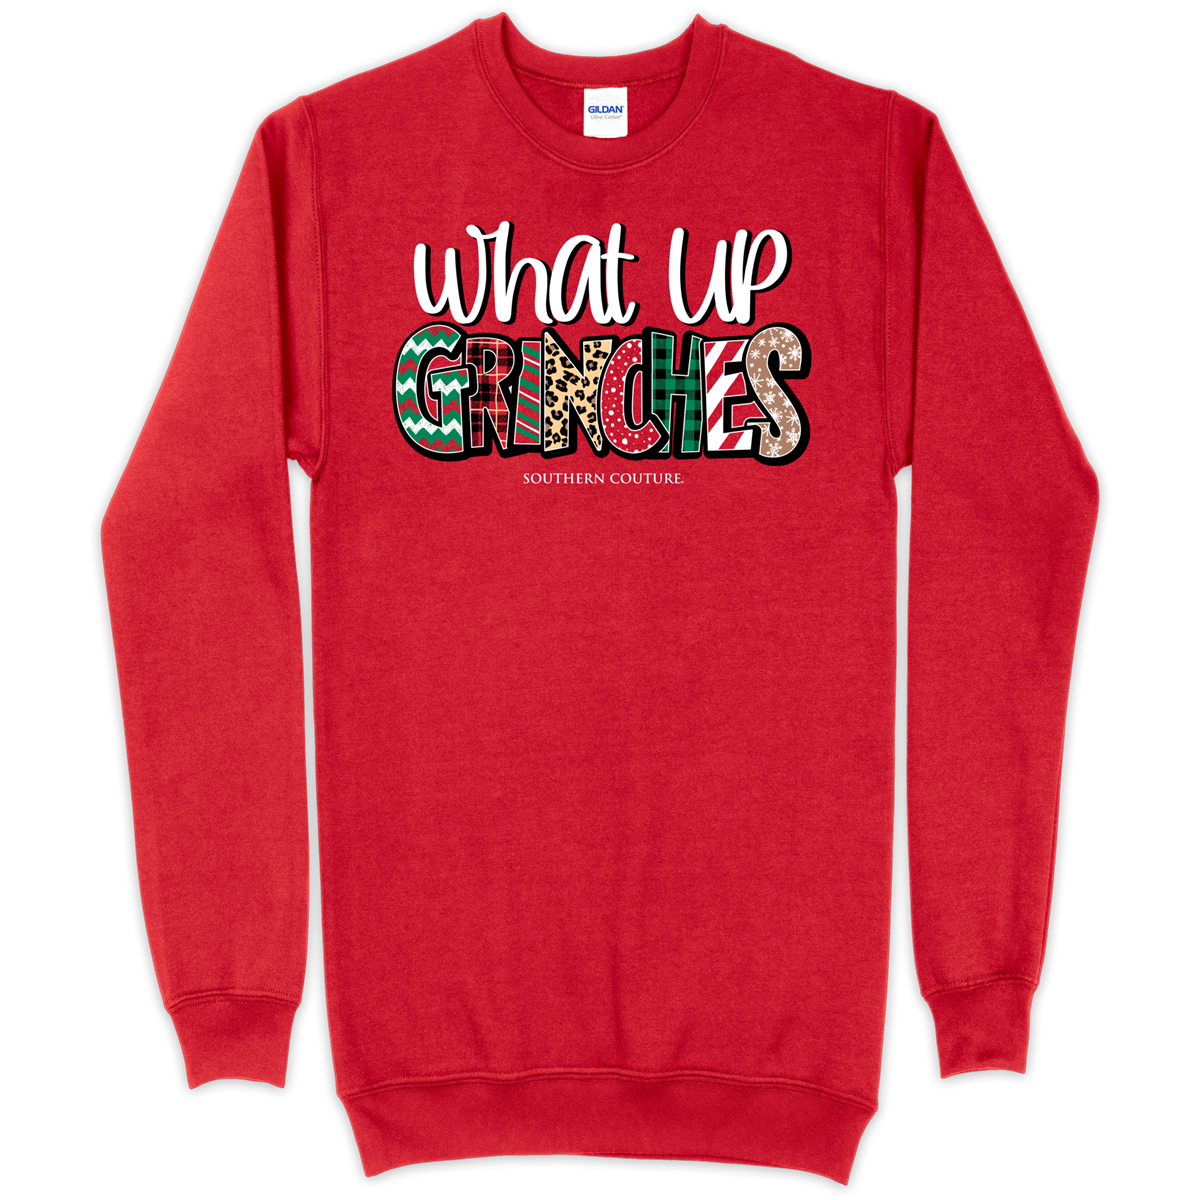 Southern Couture What Up Grinches Holiday Long Sleeve Sweatshirt T-Shirt